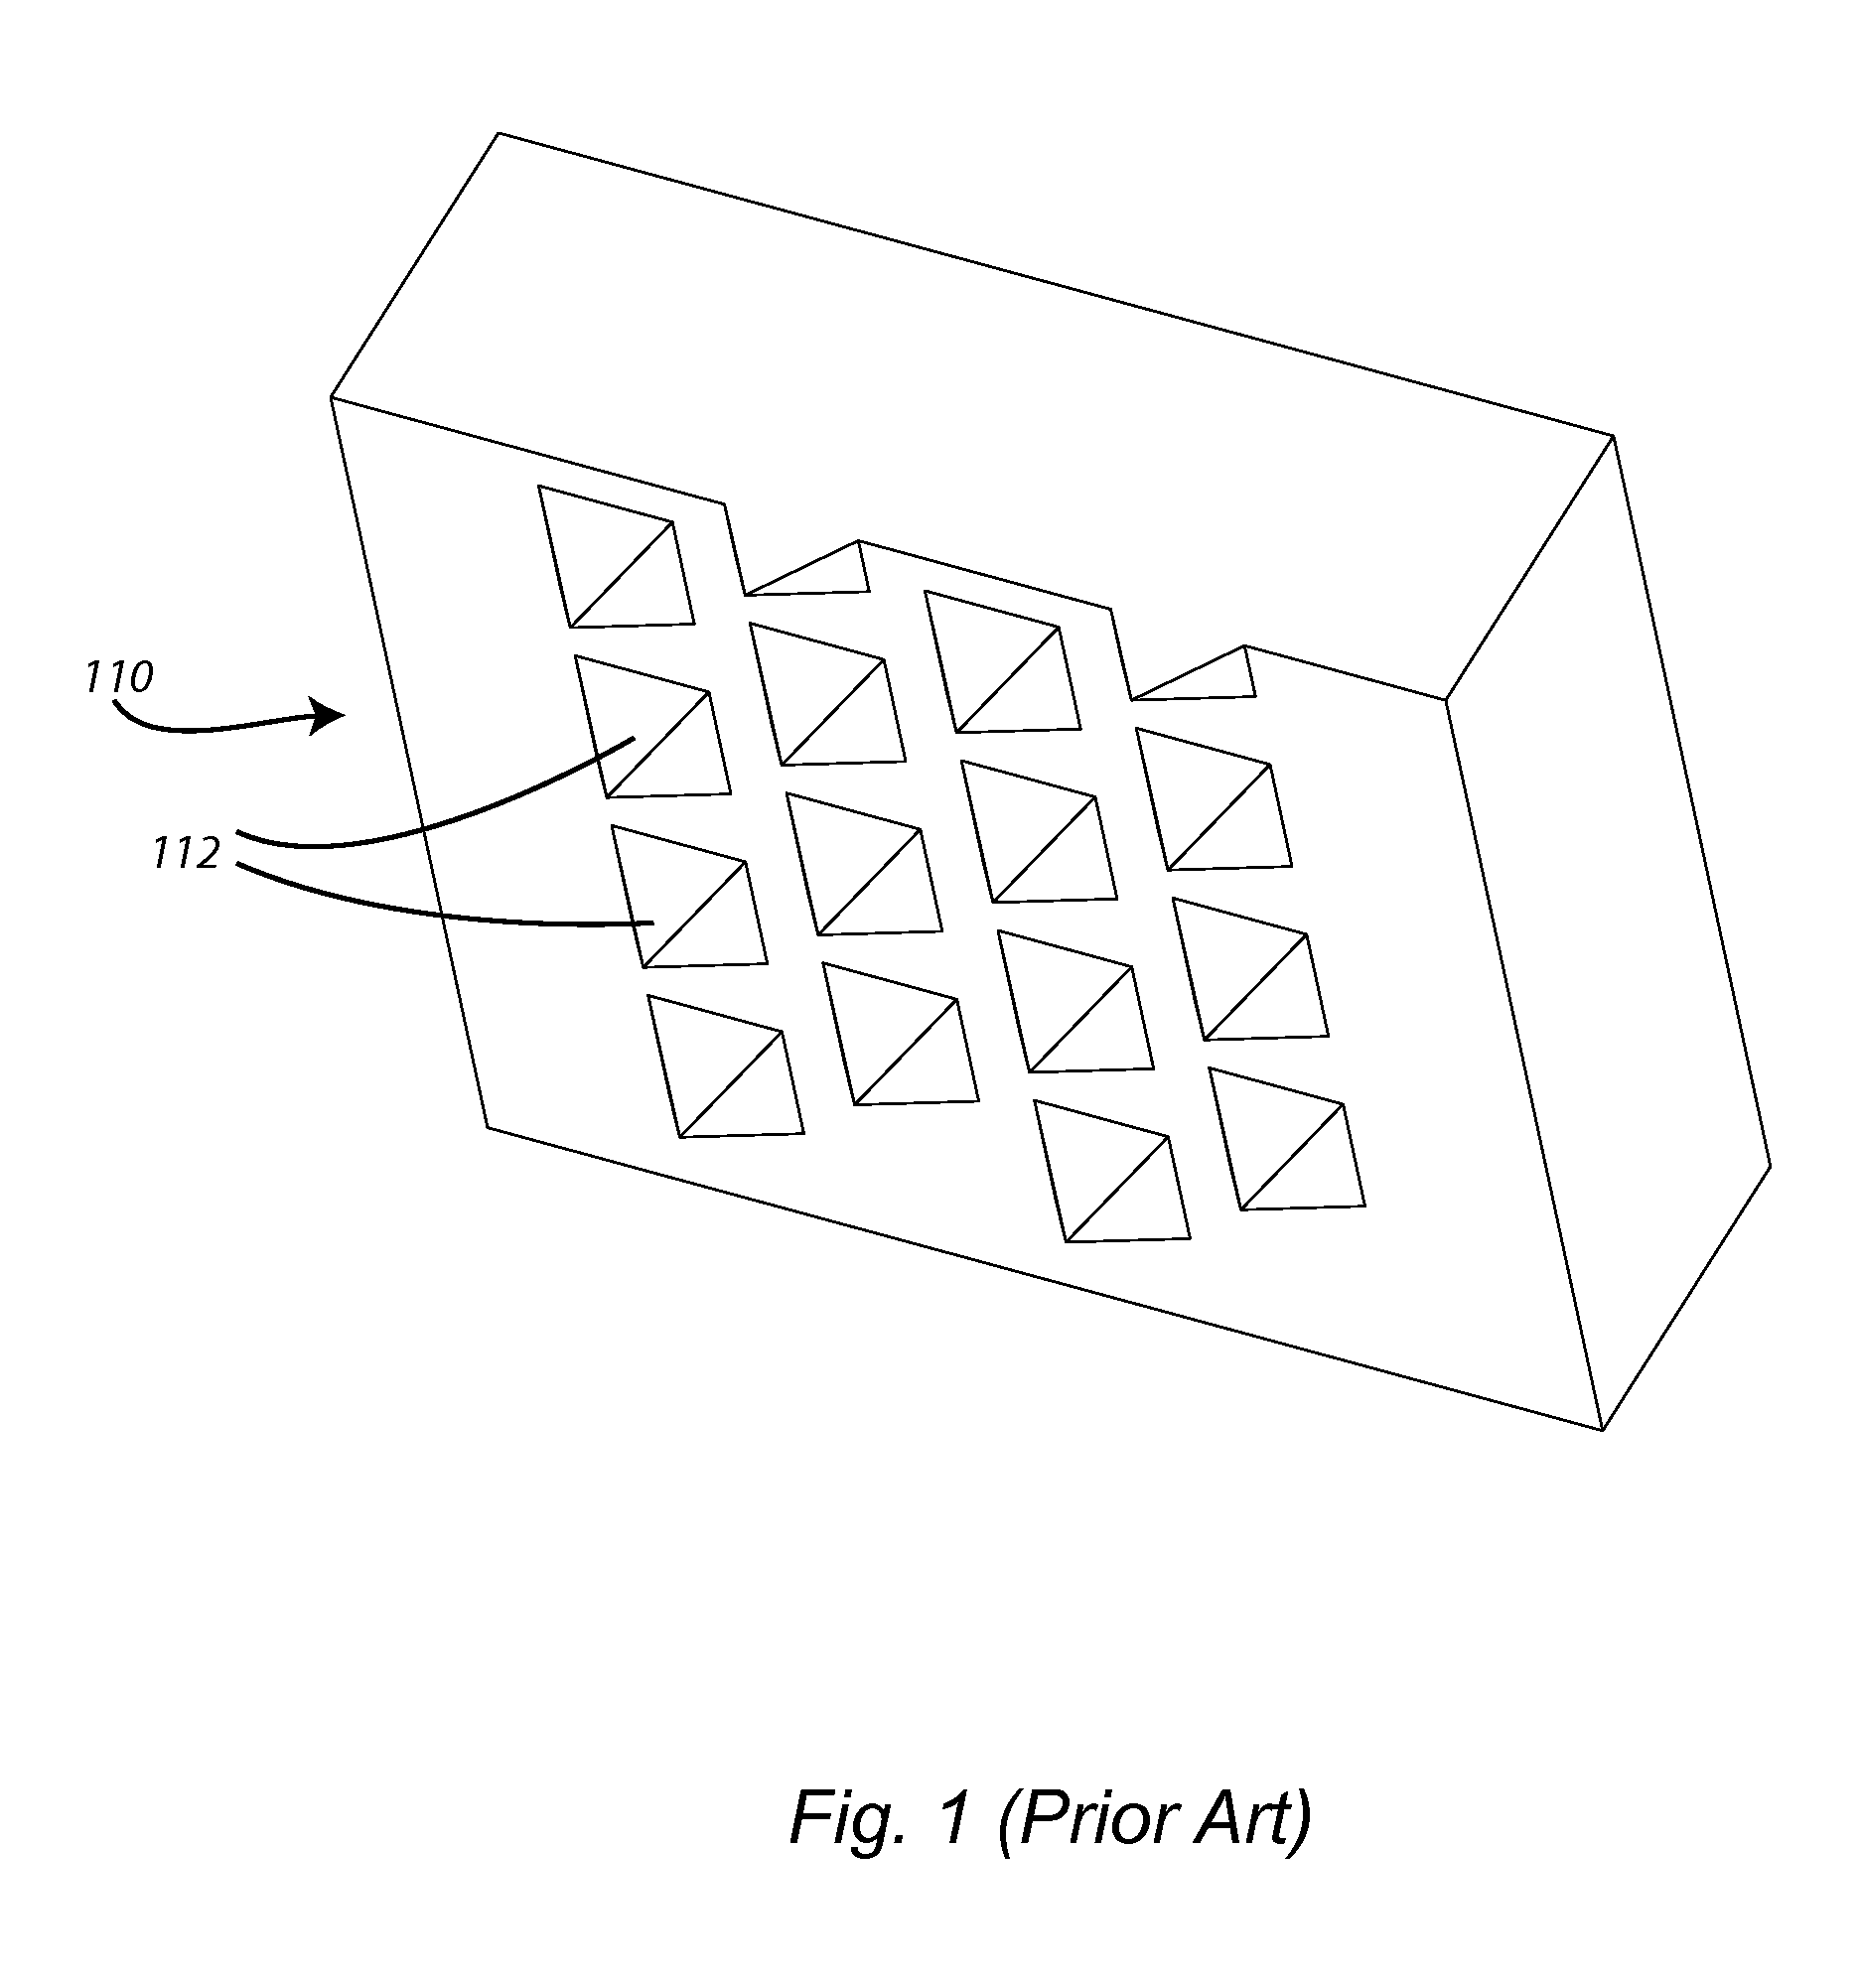 Methods and apparati for handling, heating and cooling a substrate upon which a pattern is made by a tool in heat flowable material coating, including substrate transport, tool laydown, tool tensioning and tool retraction